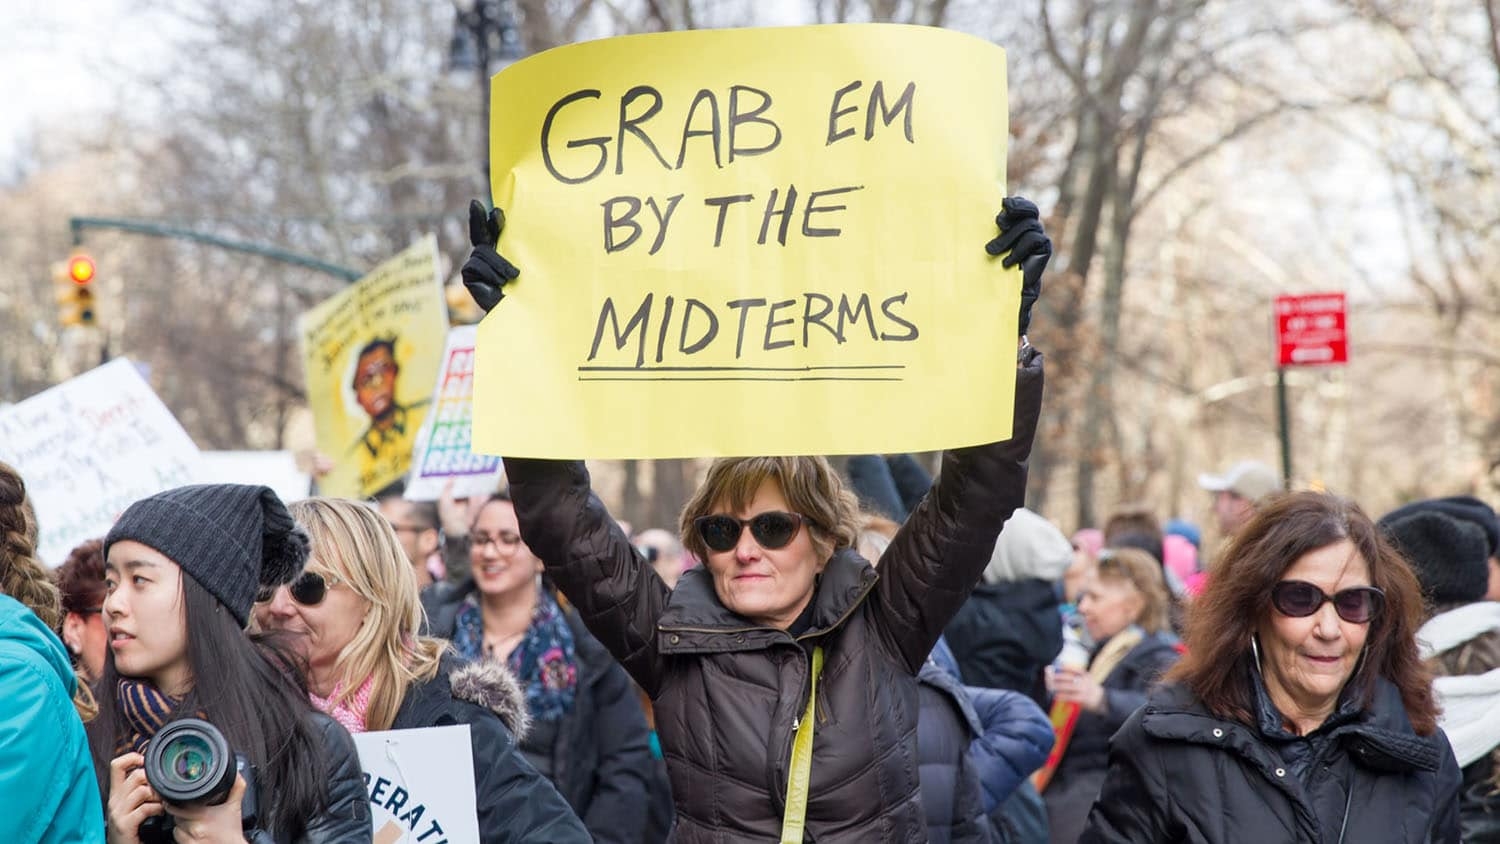 woman at a political demonstration holds a sign reading "Grab em by the midterms"